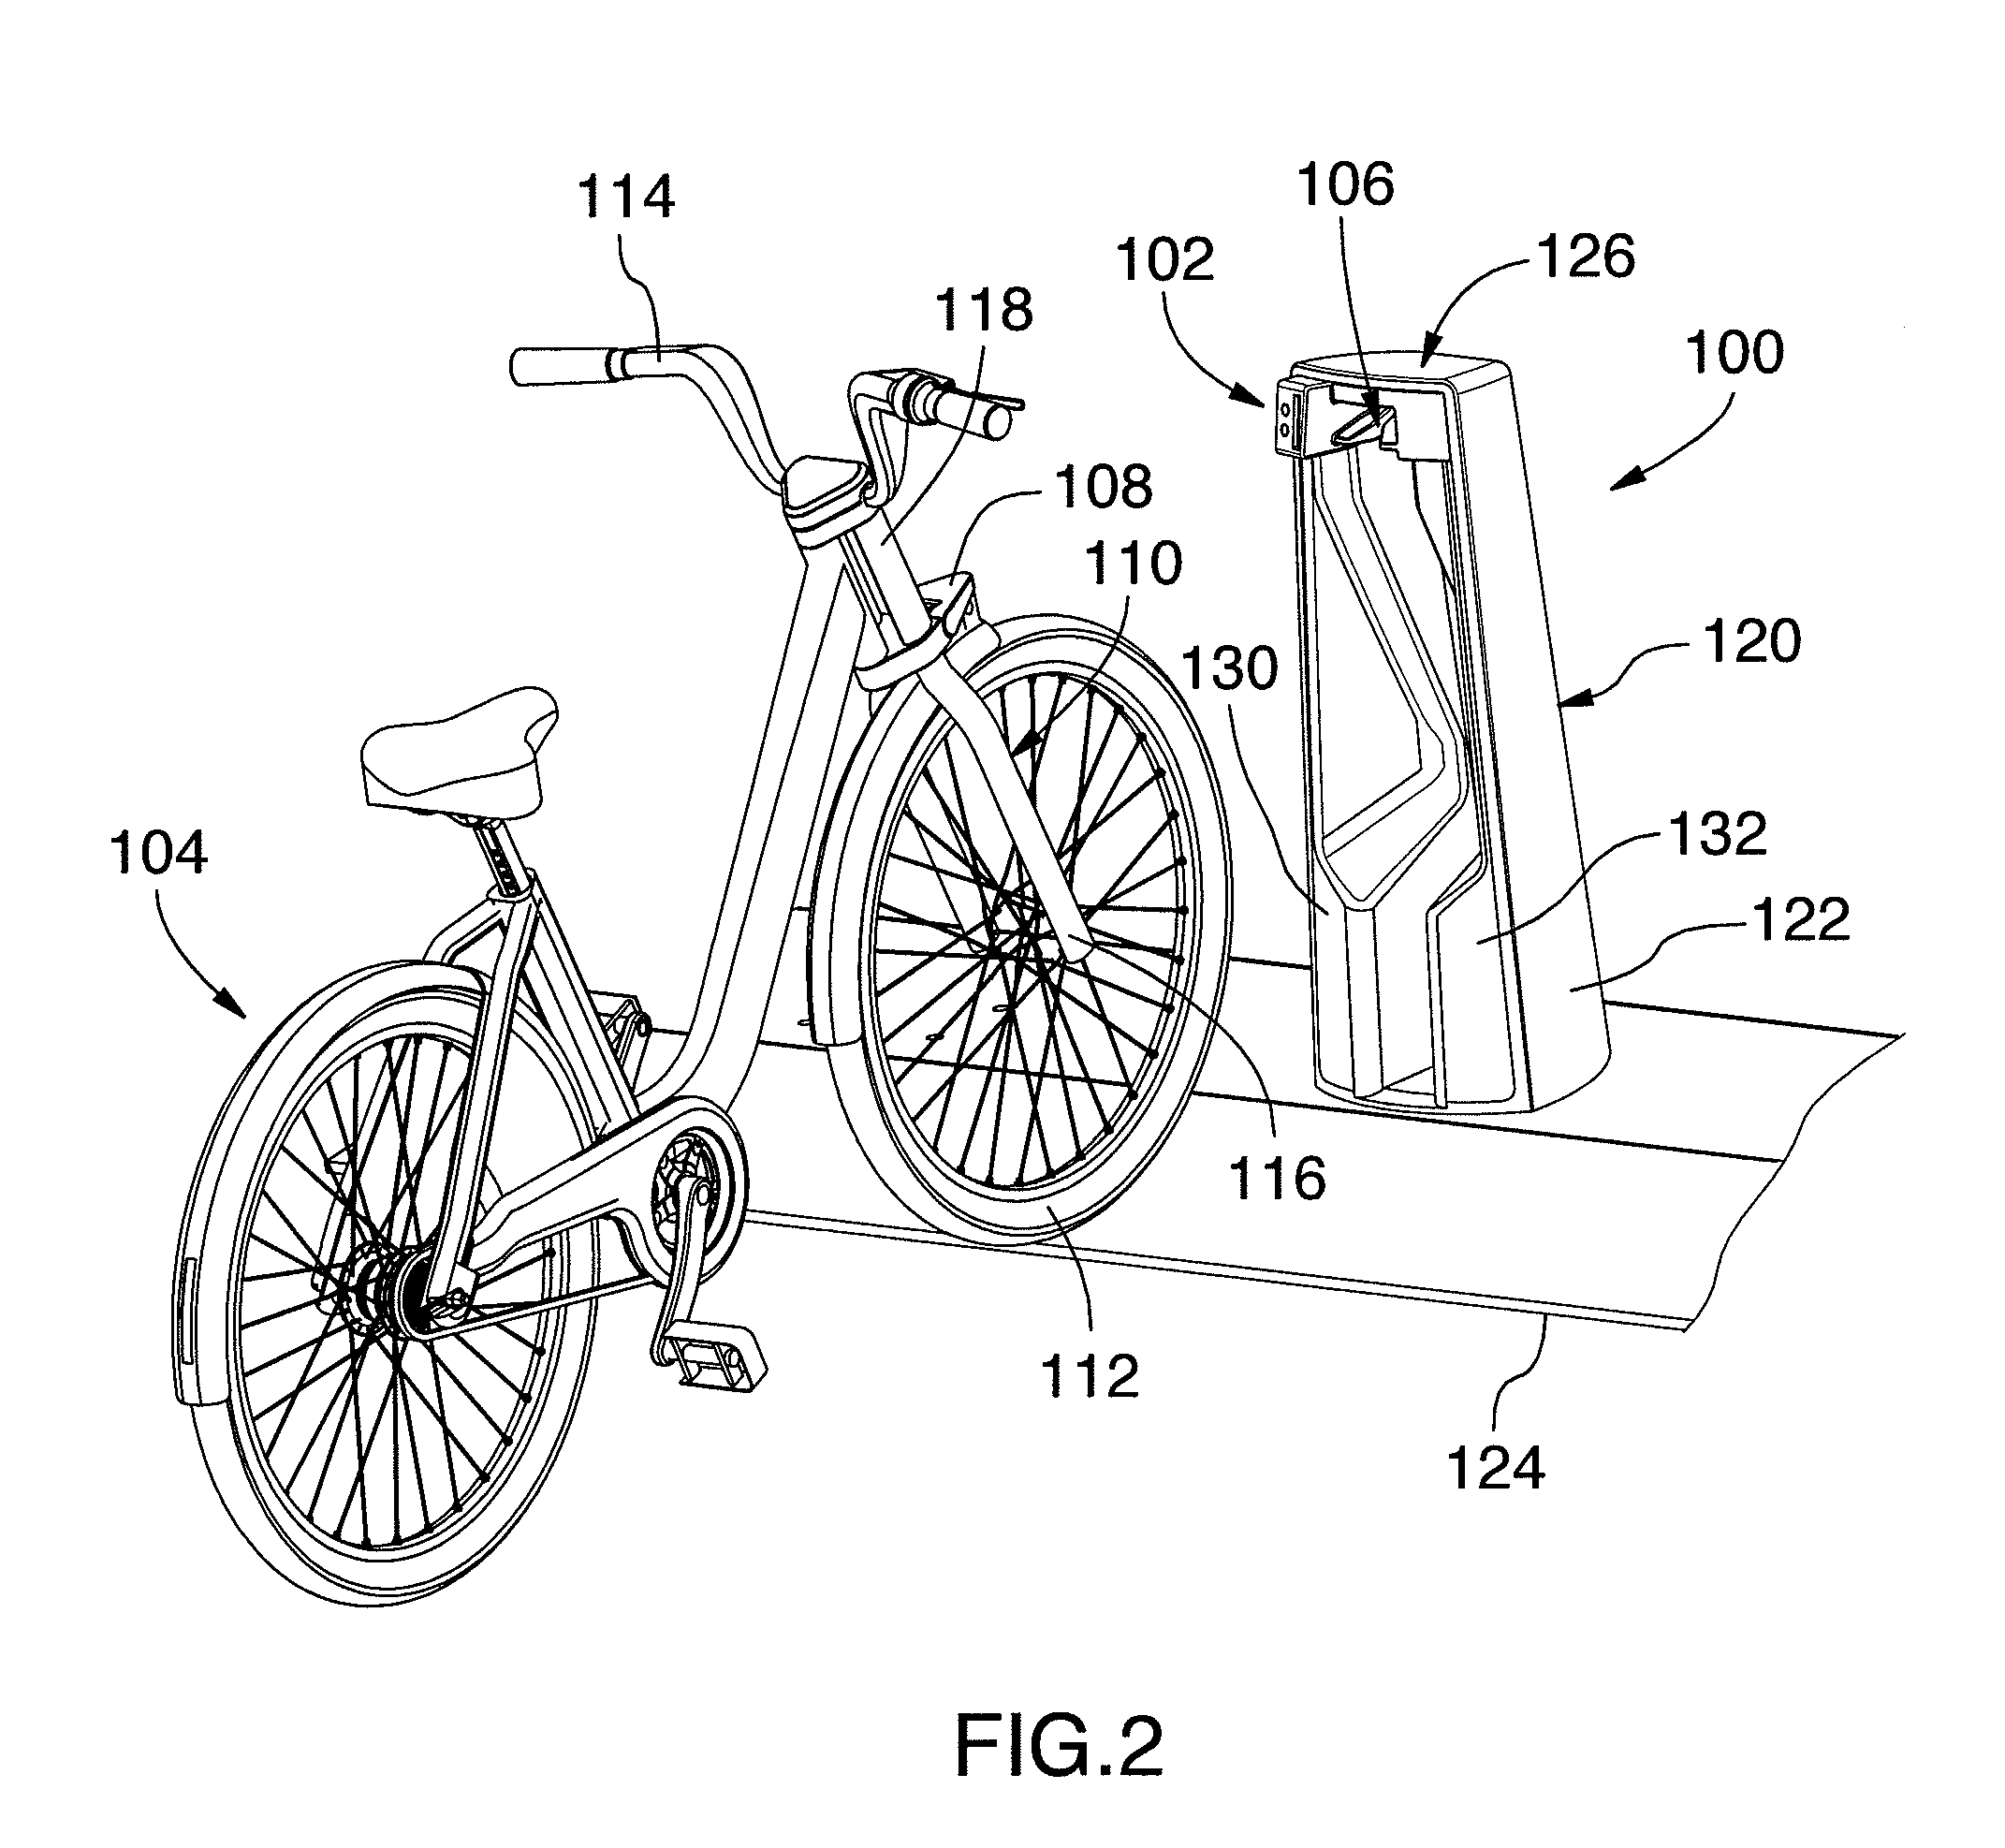 Method and apparatus for securing a movable item to a structure